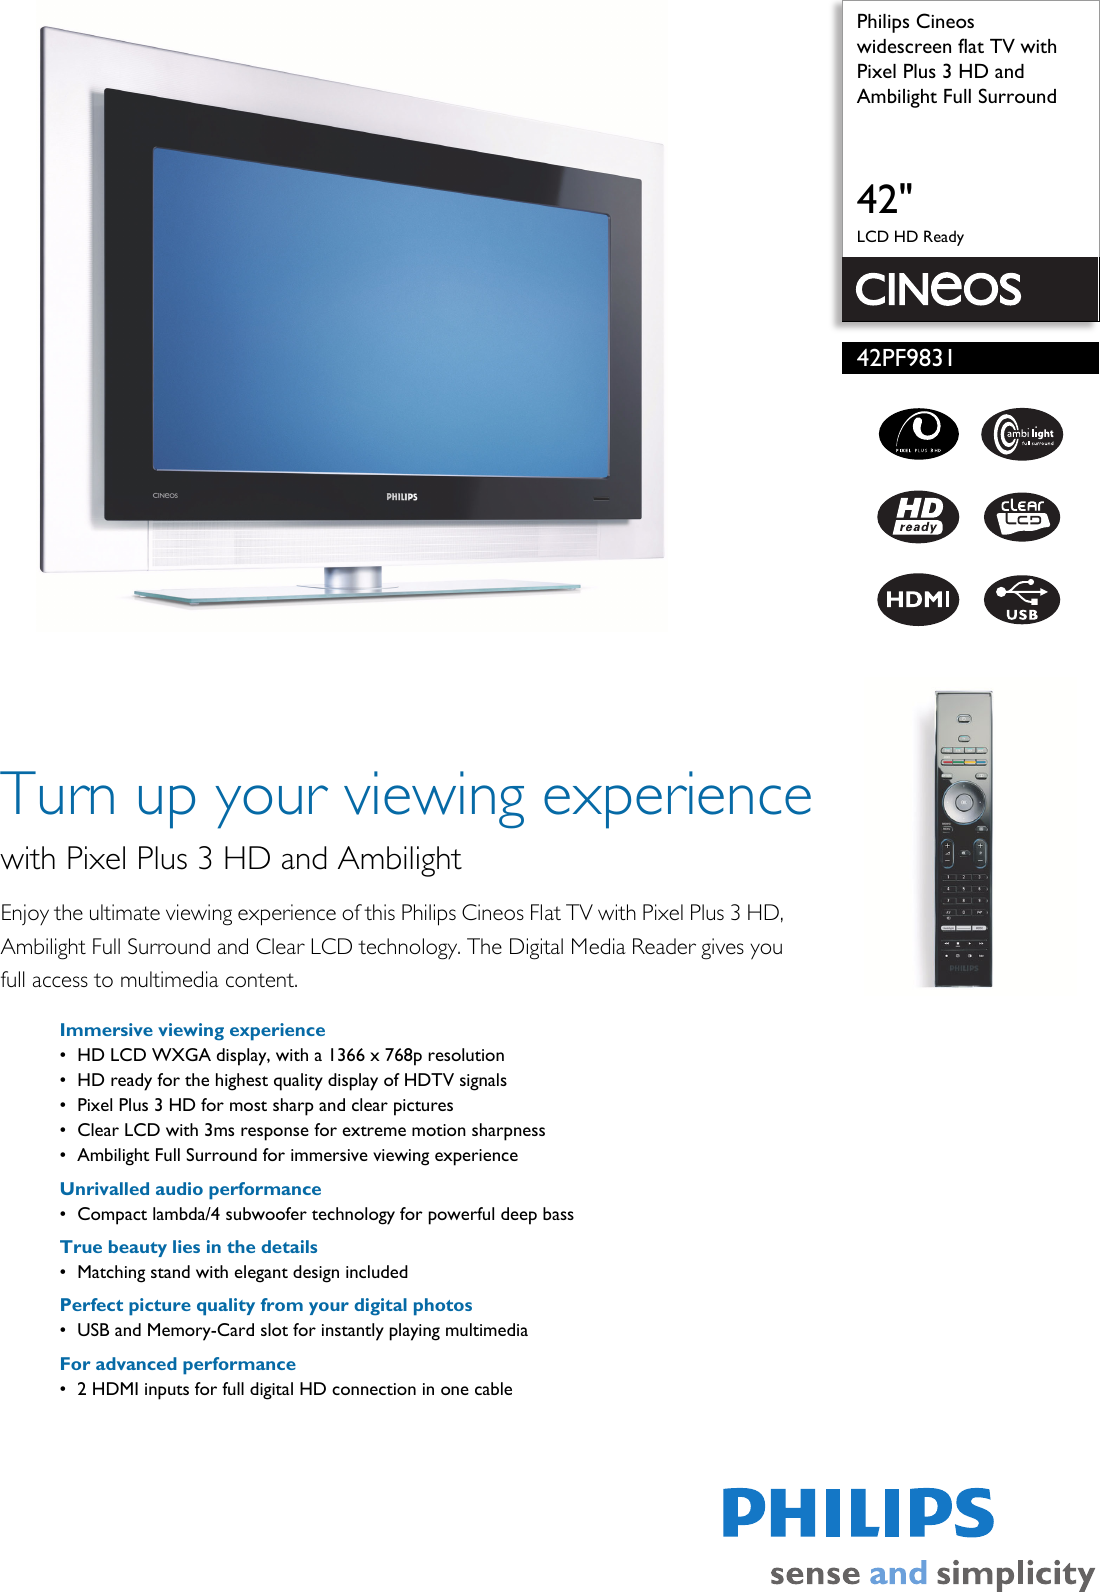 Page 1 of 3 - Philips Philips-Cineos-42Pf9831-Users-Manual- 42PF9831/69 Widescreen Flat TV With Pixel Plus 3 HD And Ambilight Full Surround  Philips-cineos-42pf9831-users-manual